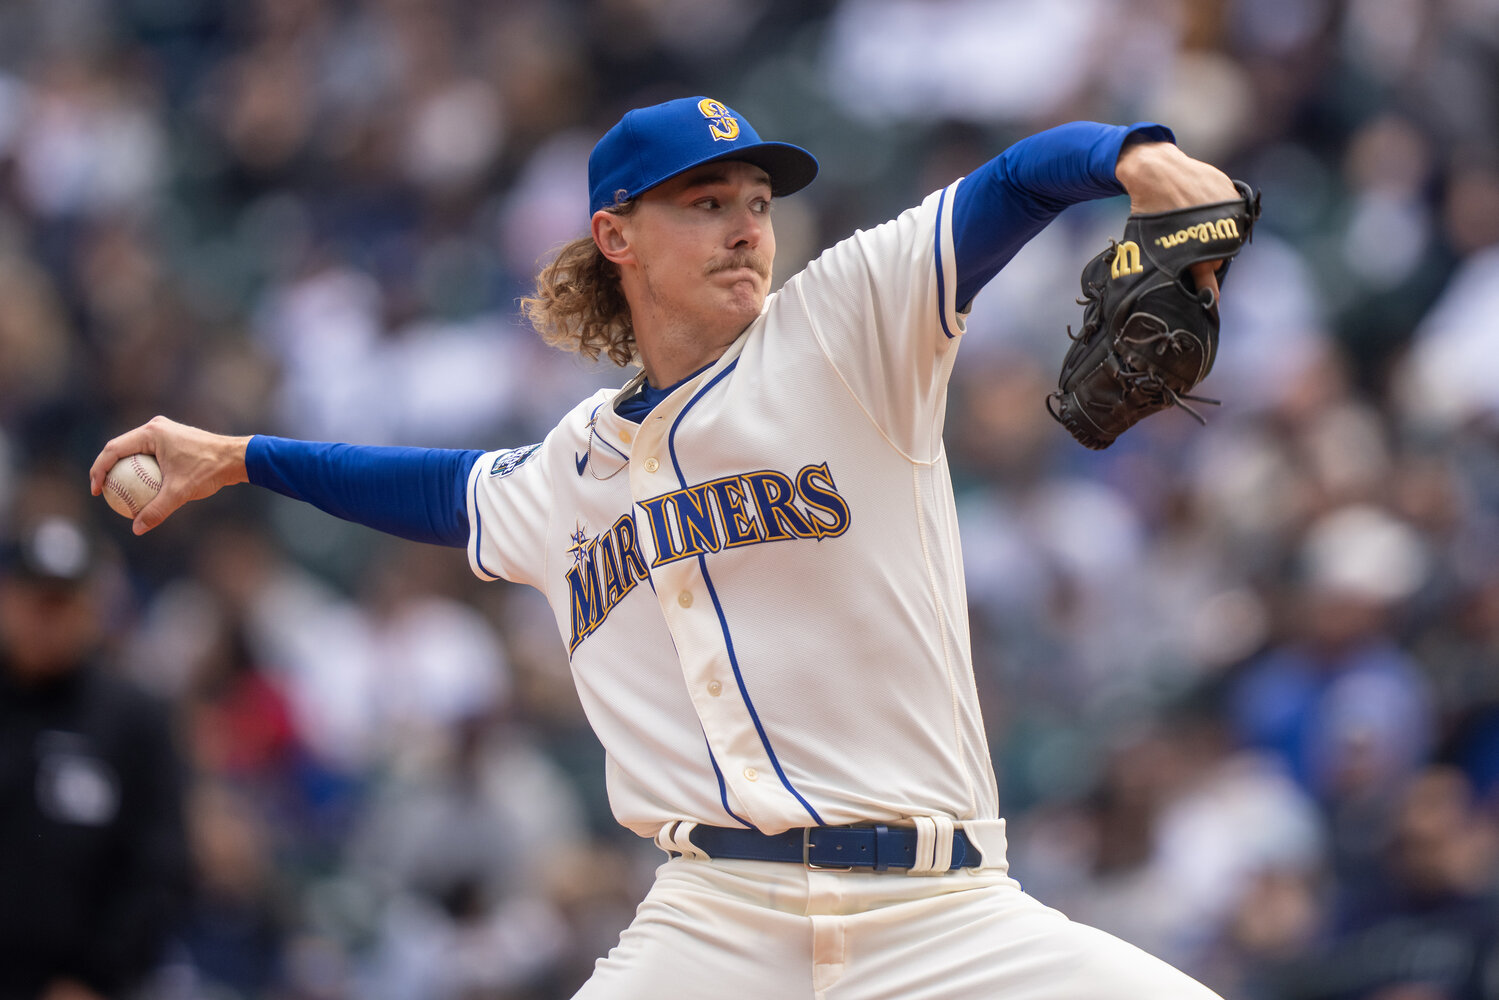 Starter Bryce Miller (50) of the Seattle Mariners delivers a pitch during the first inning against the Houston Astros at T-Mobile Park on May 7, 2023, in Seattle, Washington. (Stephen Brashear/Getty Images/TNS)